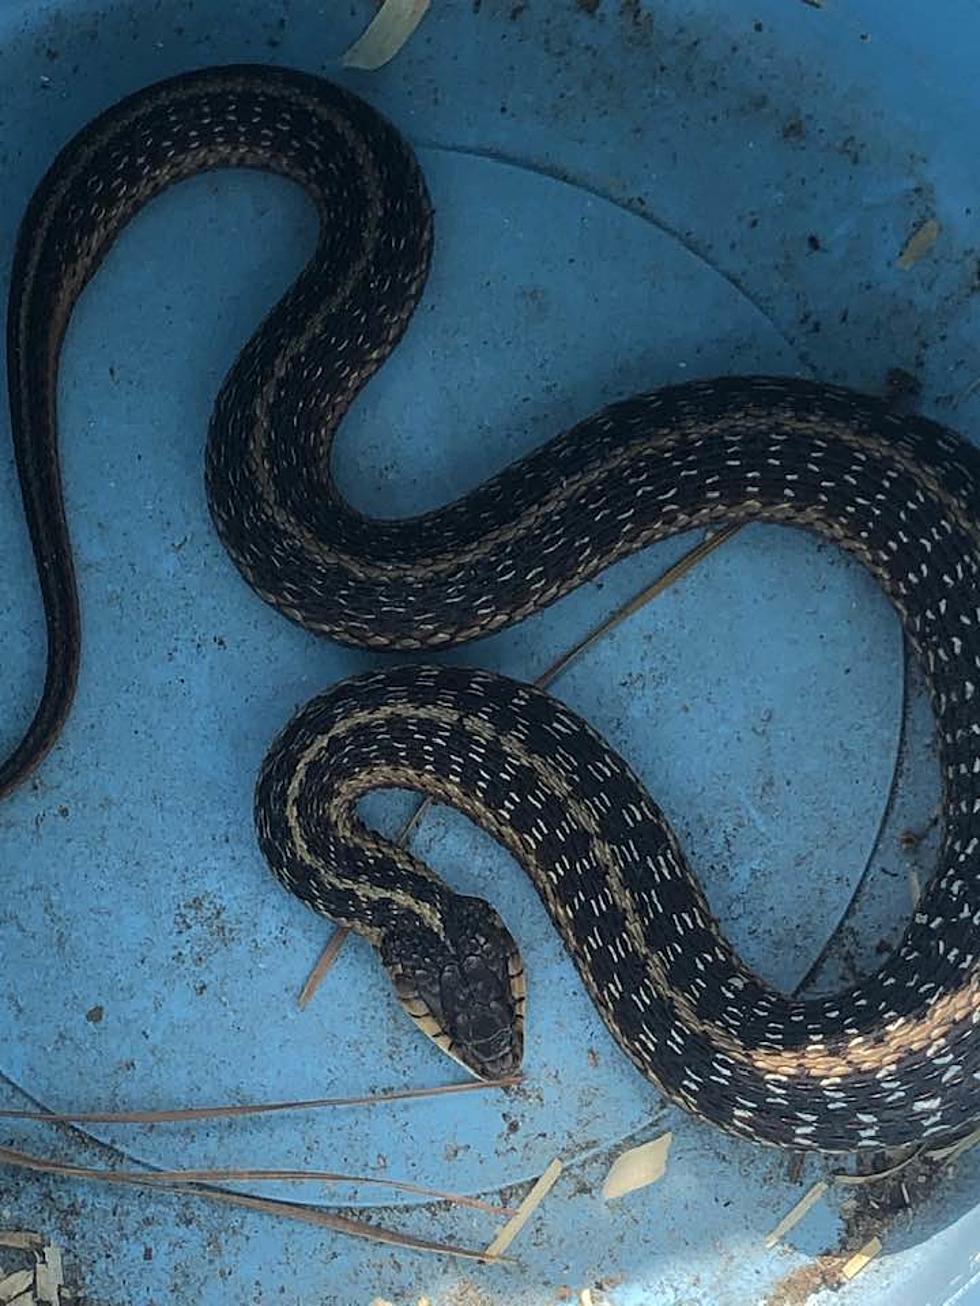 The Most Snake-Infested Lakes in New Jersey